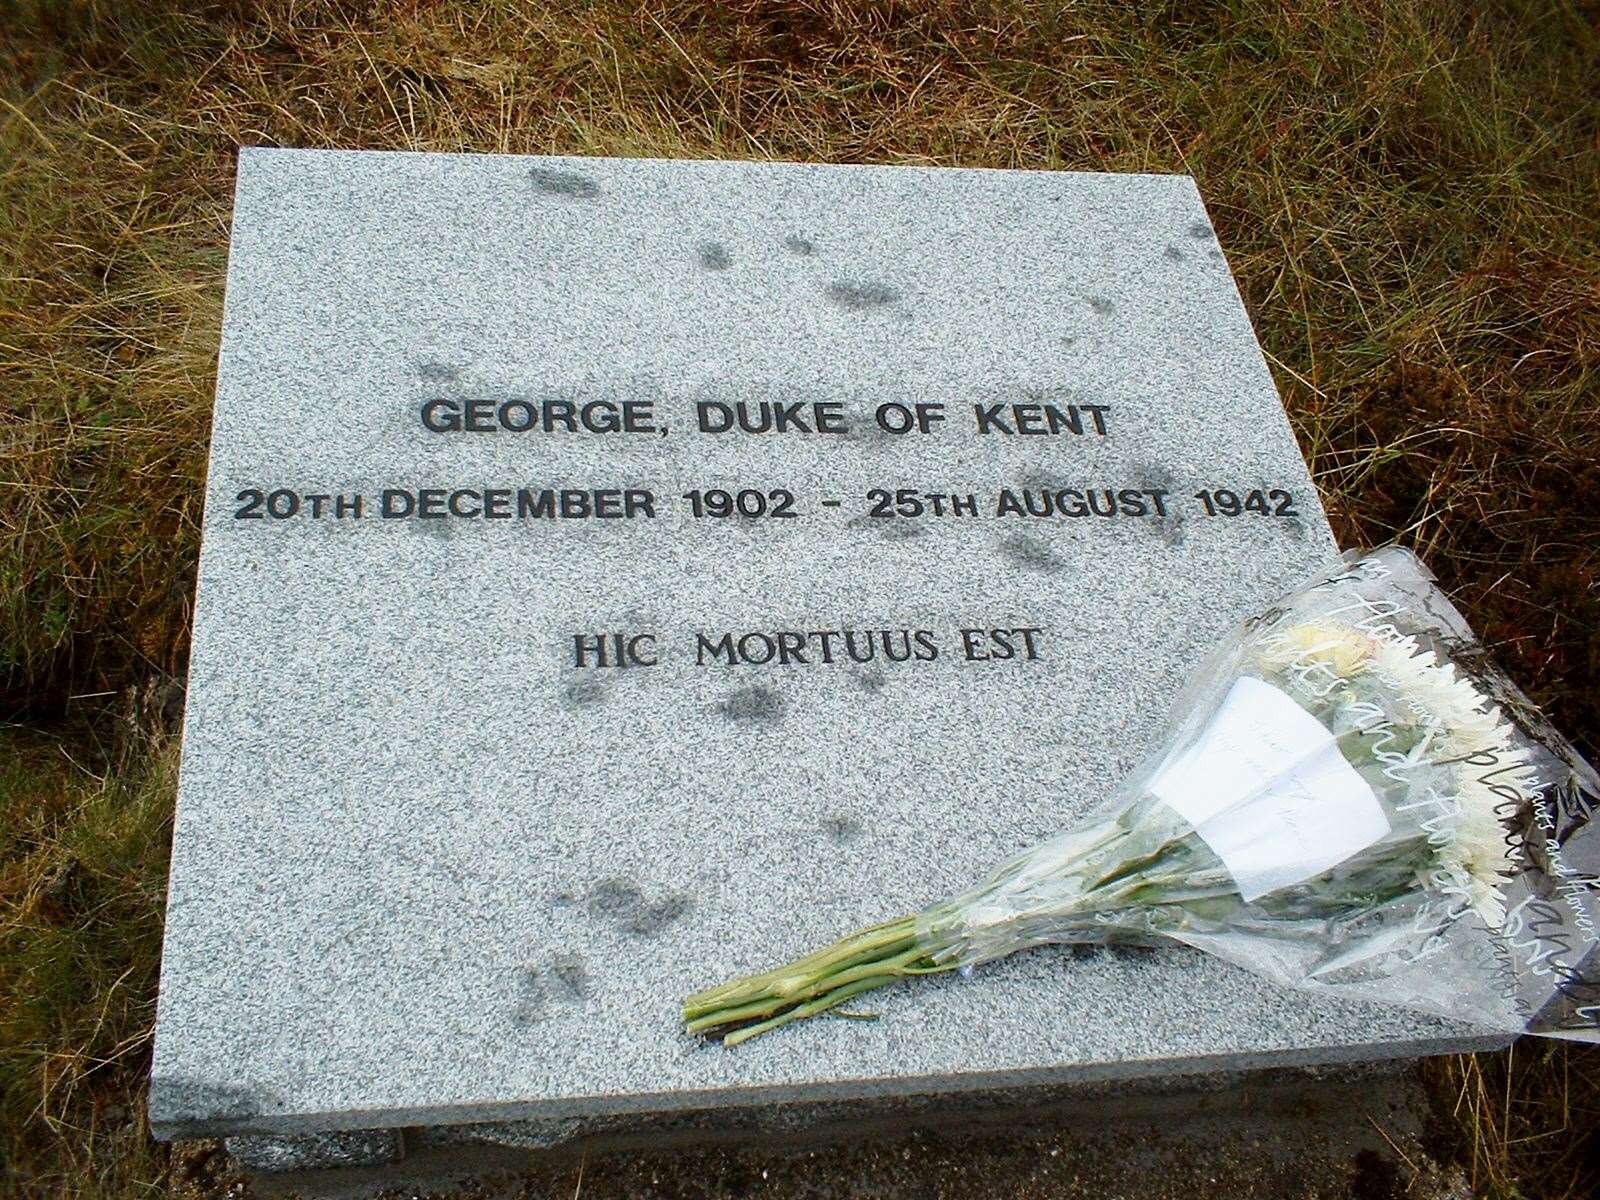 This stone slab in memory of the Duke of Kent was installed in 2005, close to the memorial cross at Eagle's Rock. It contains the Latin phrase Hic Mortuus Est, meaning 'This is where he died.' Picture: Alan Hendry